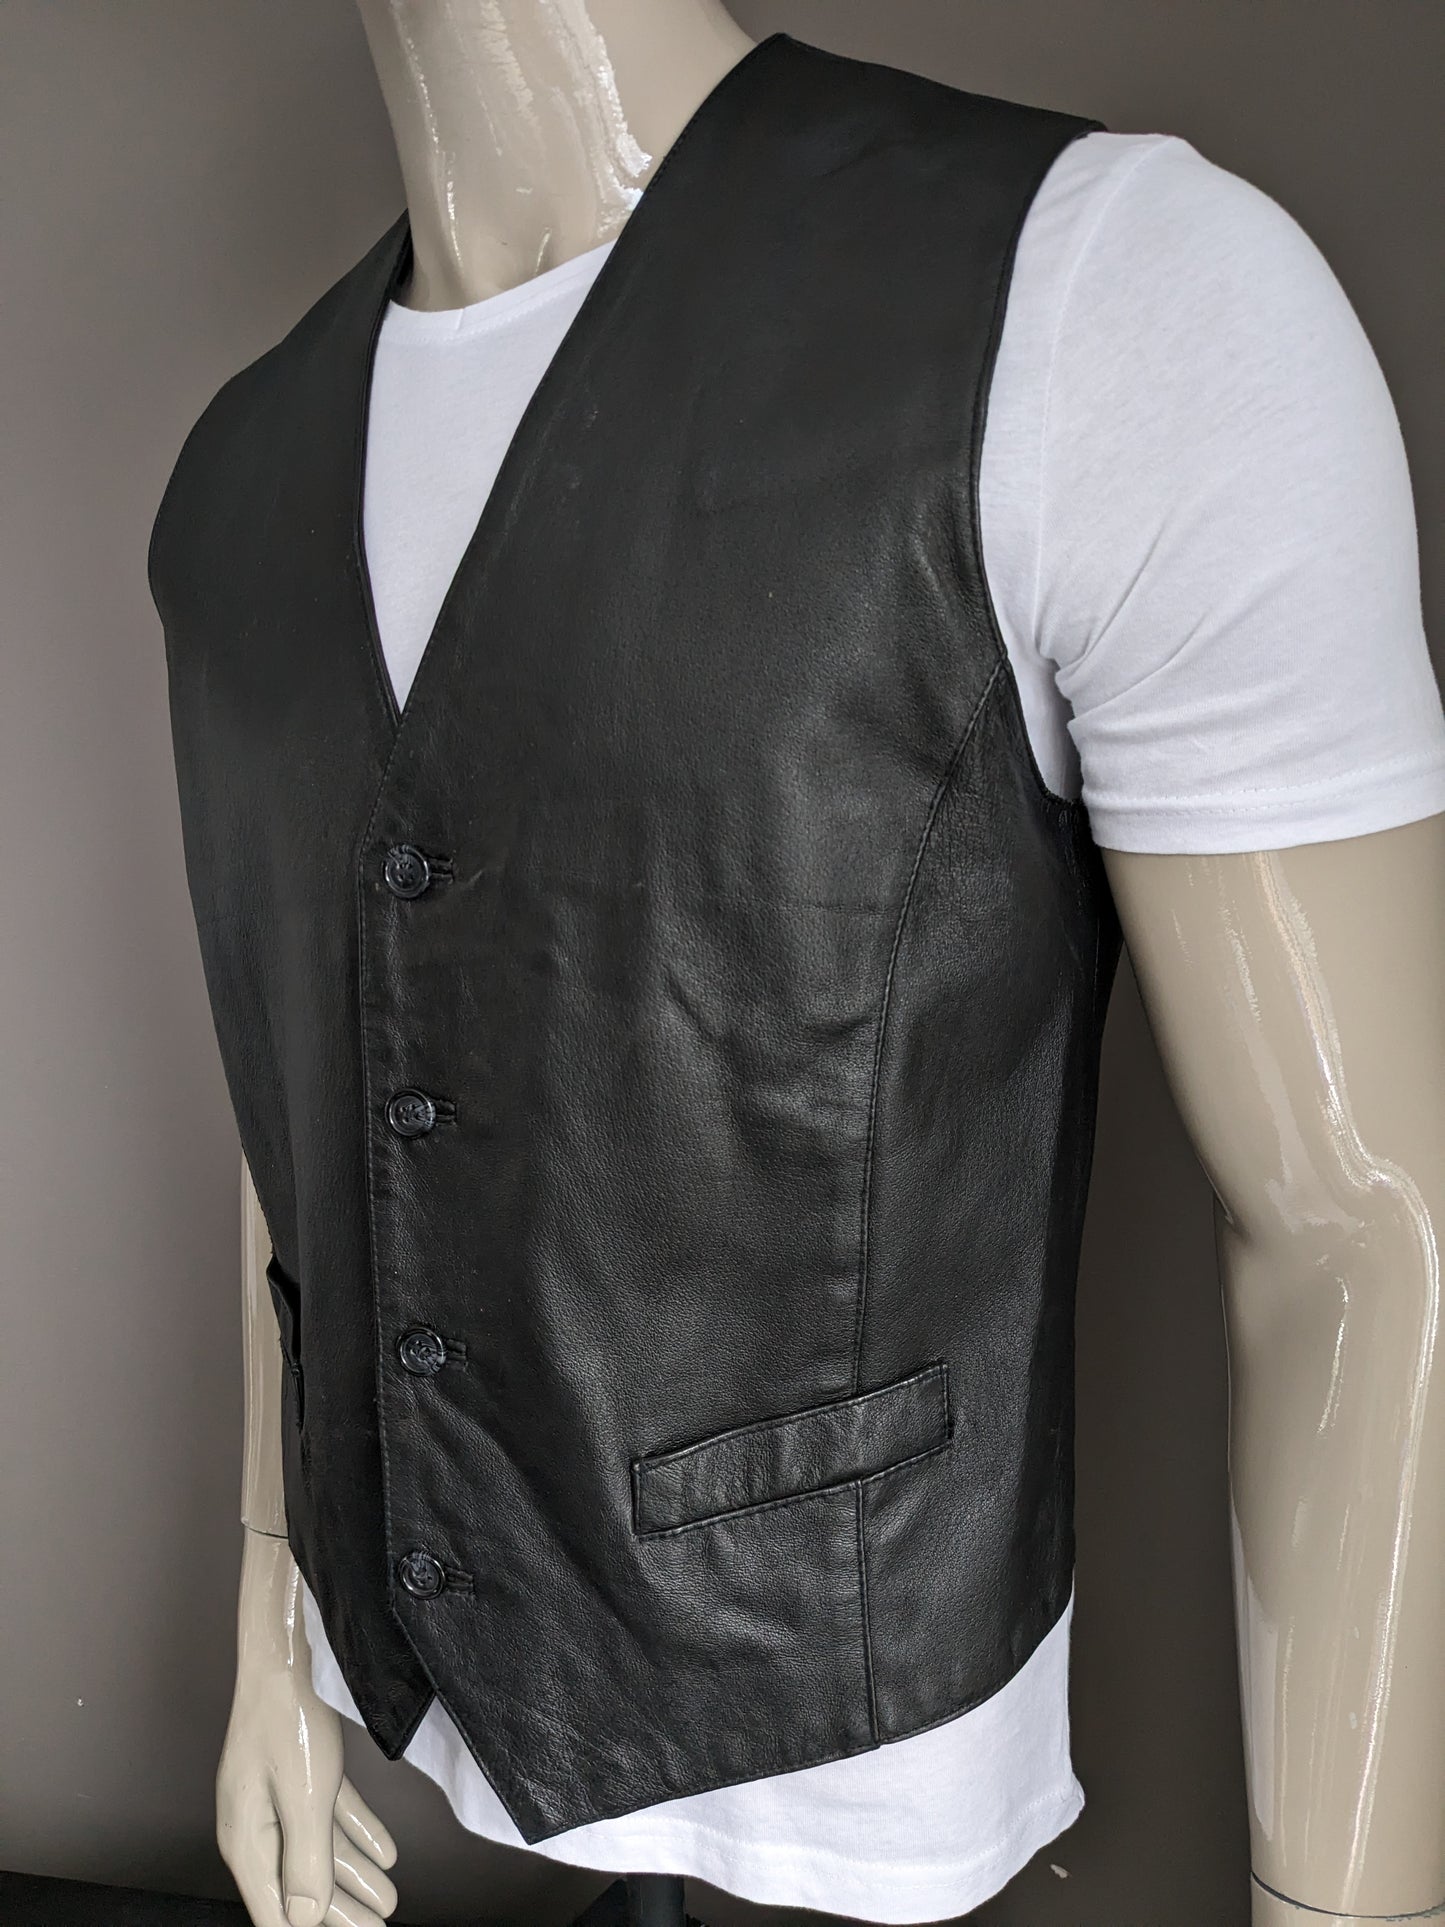 Conwell pigs Learn waistcoat. Double sided. Black XL with inner pocket.